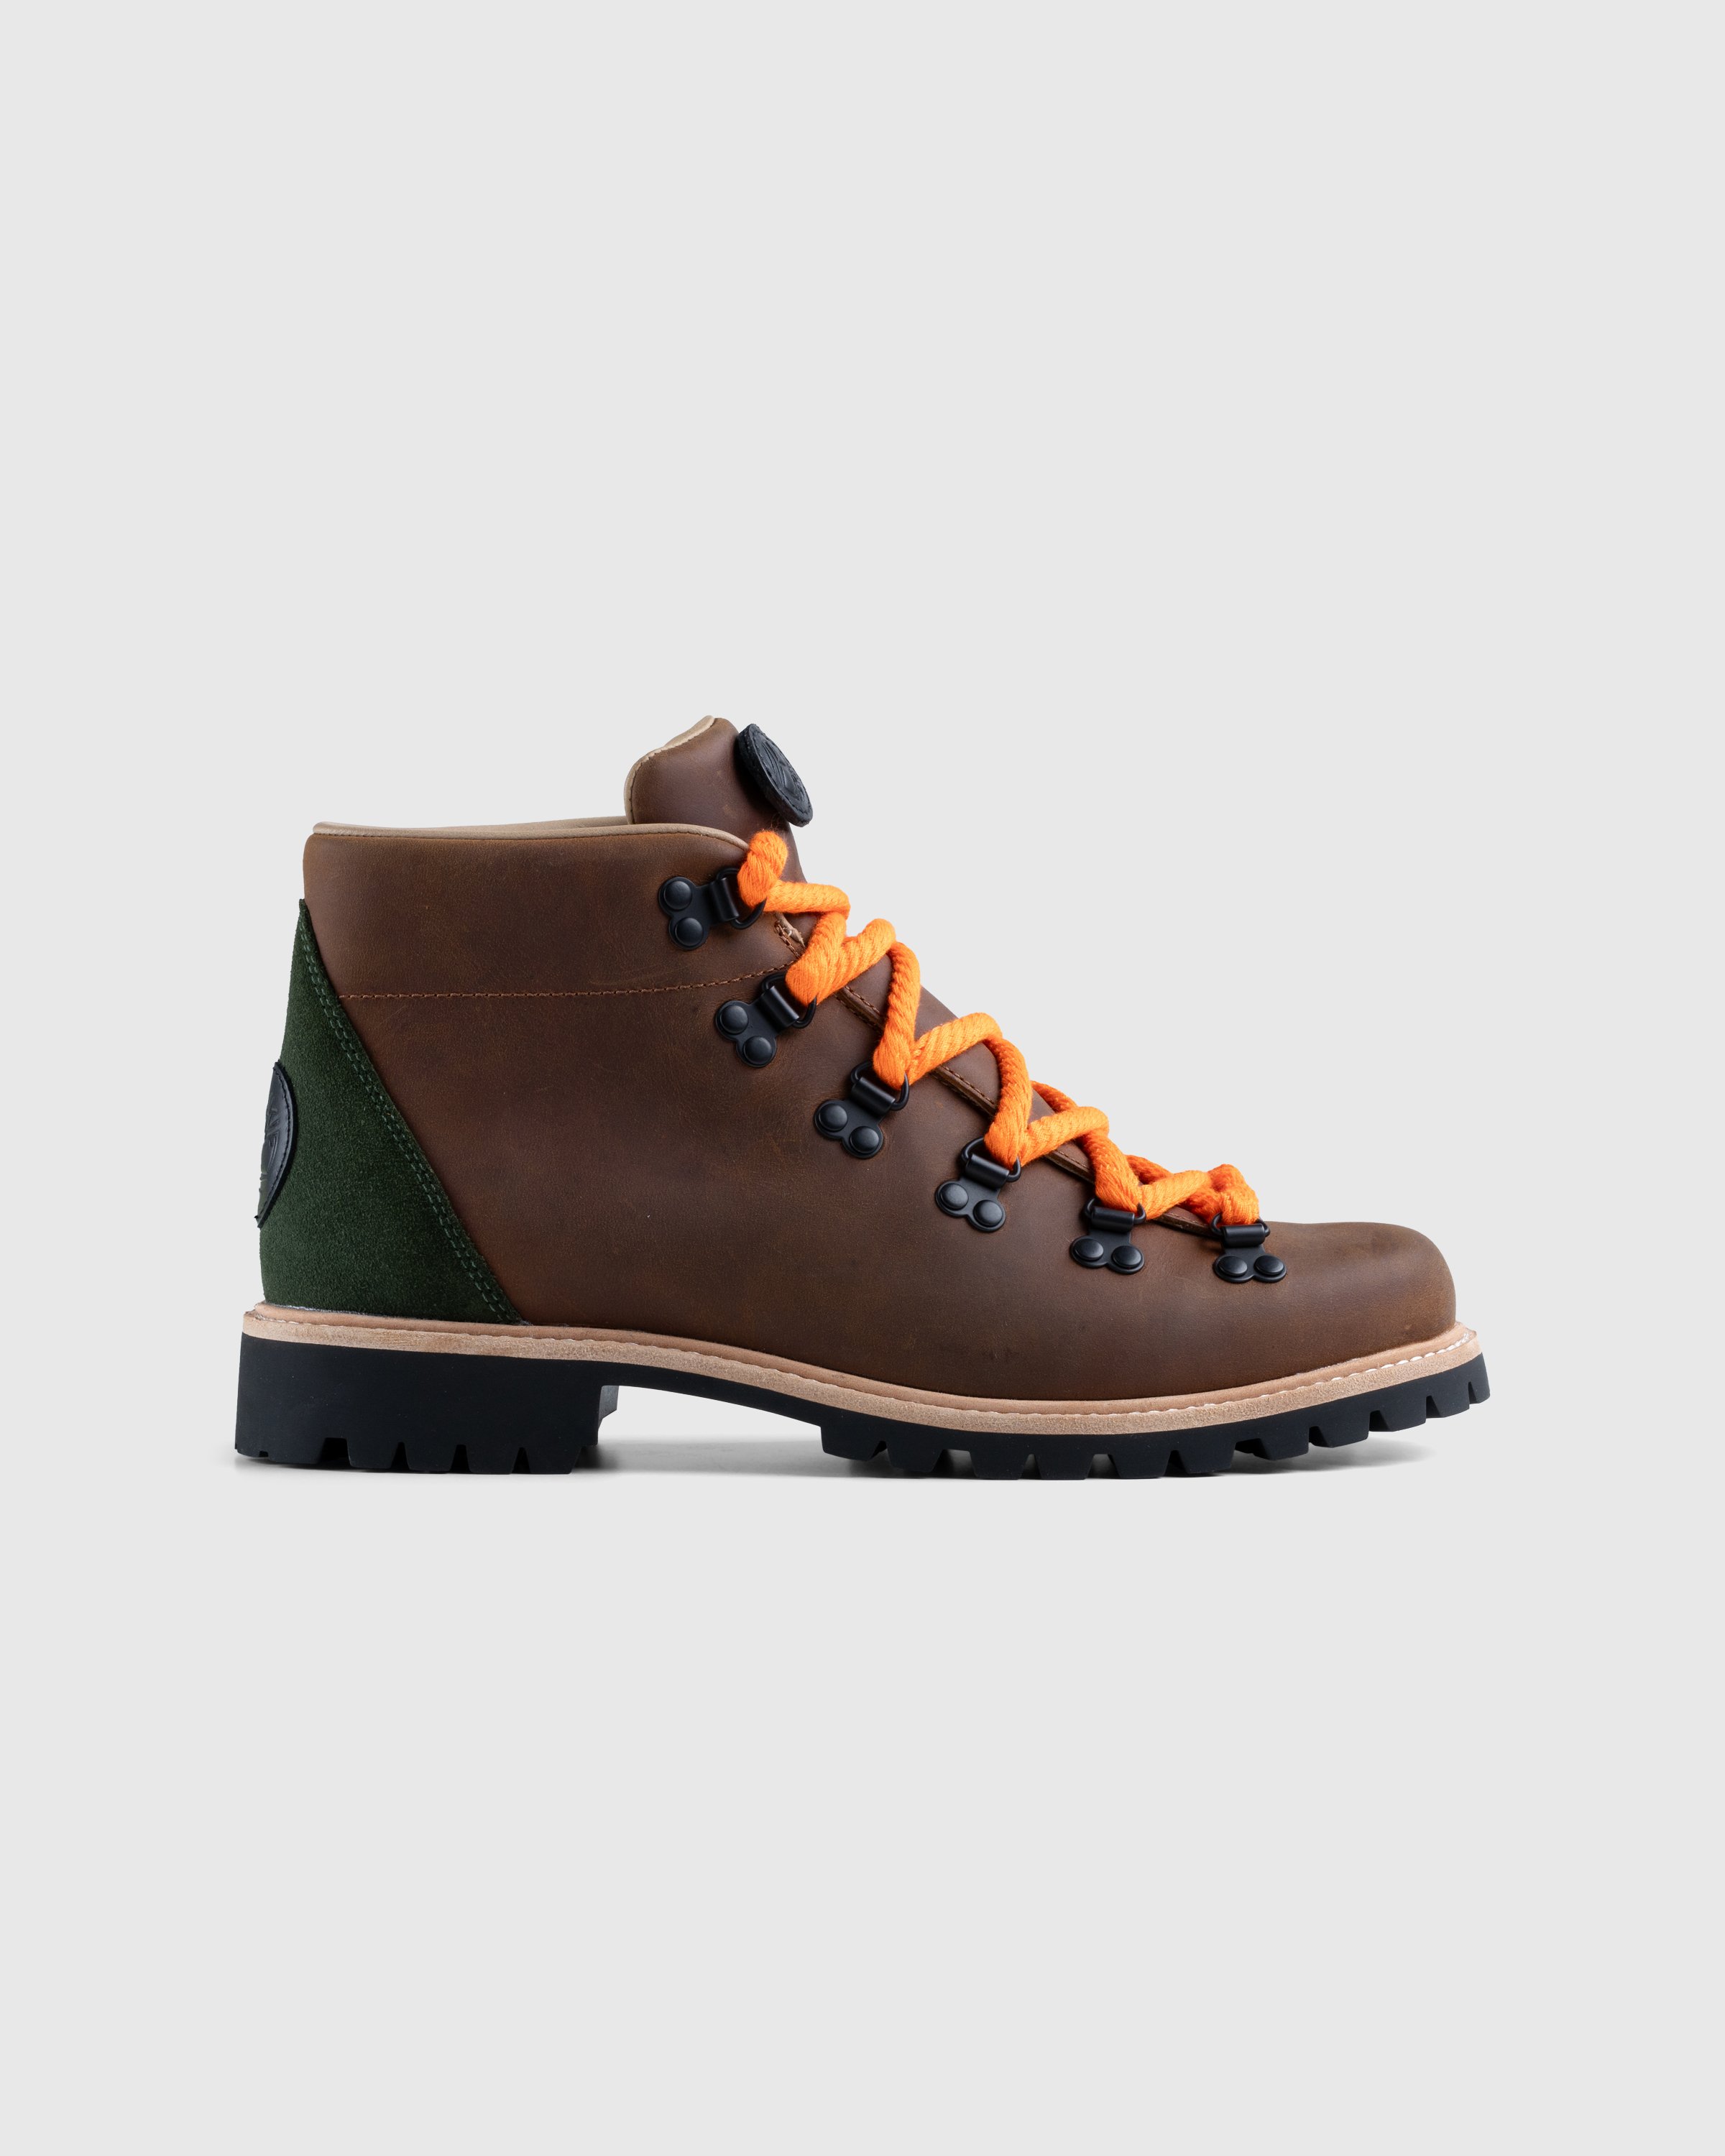 Timberland x Nina Chanel - MID LACE UP BOOT SADDLE - Footwear - Brown - Image 1